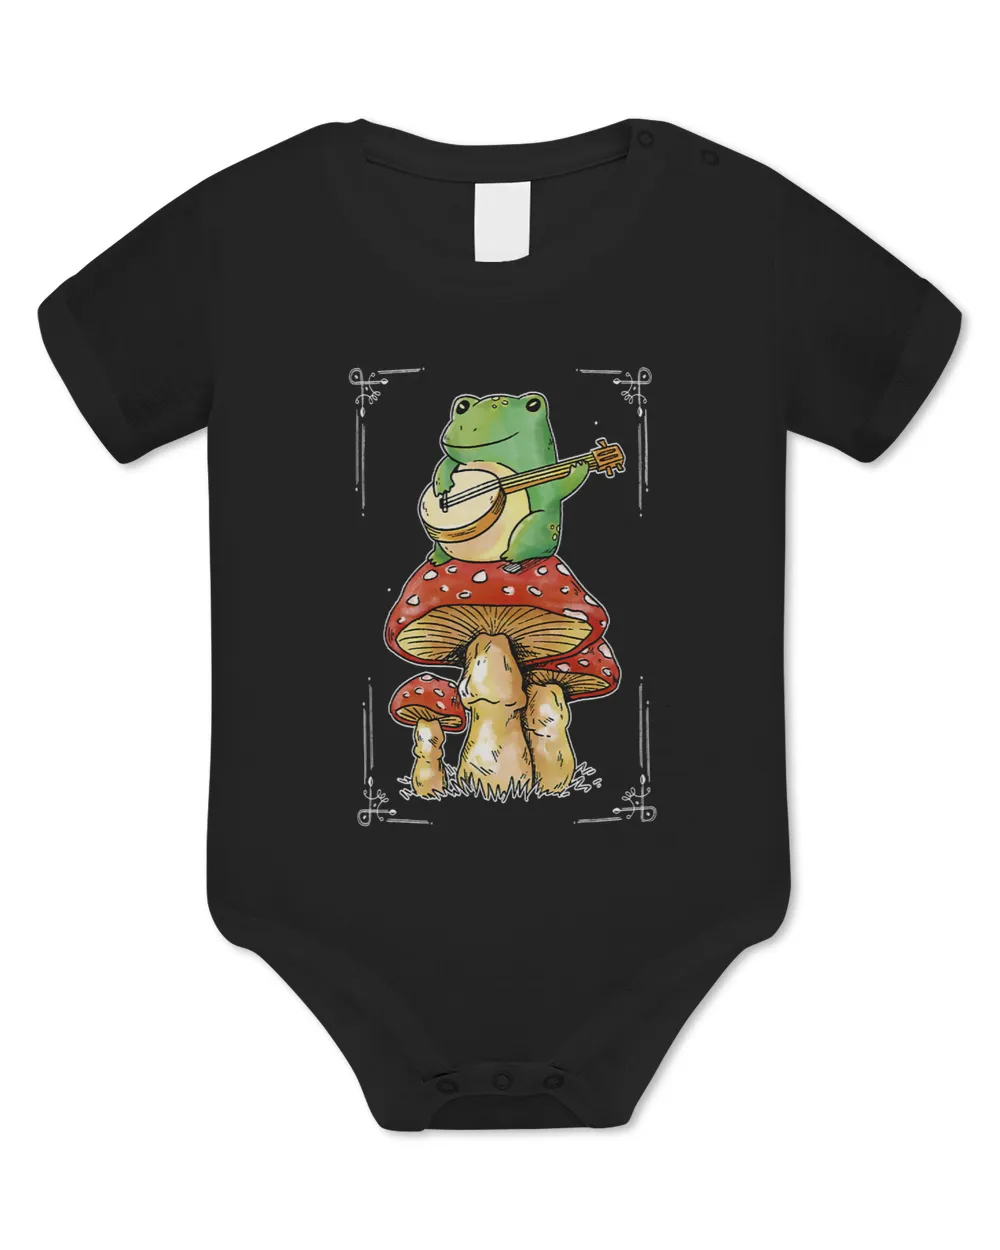 Frogs Cute Cottagecore Aesthetic Frog Playing Banjo on Mushroom45